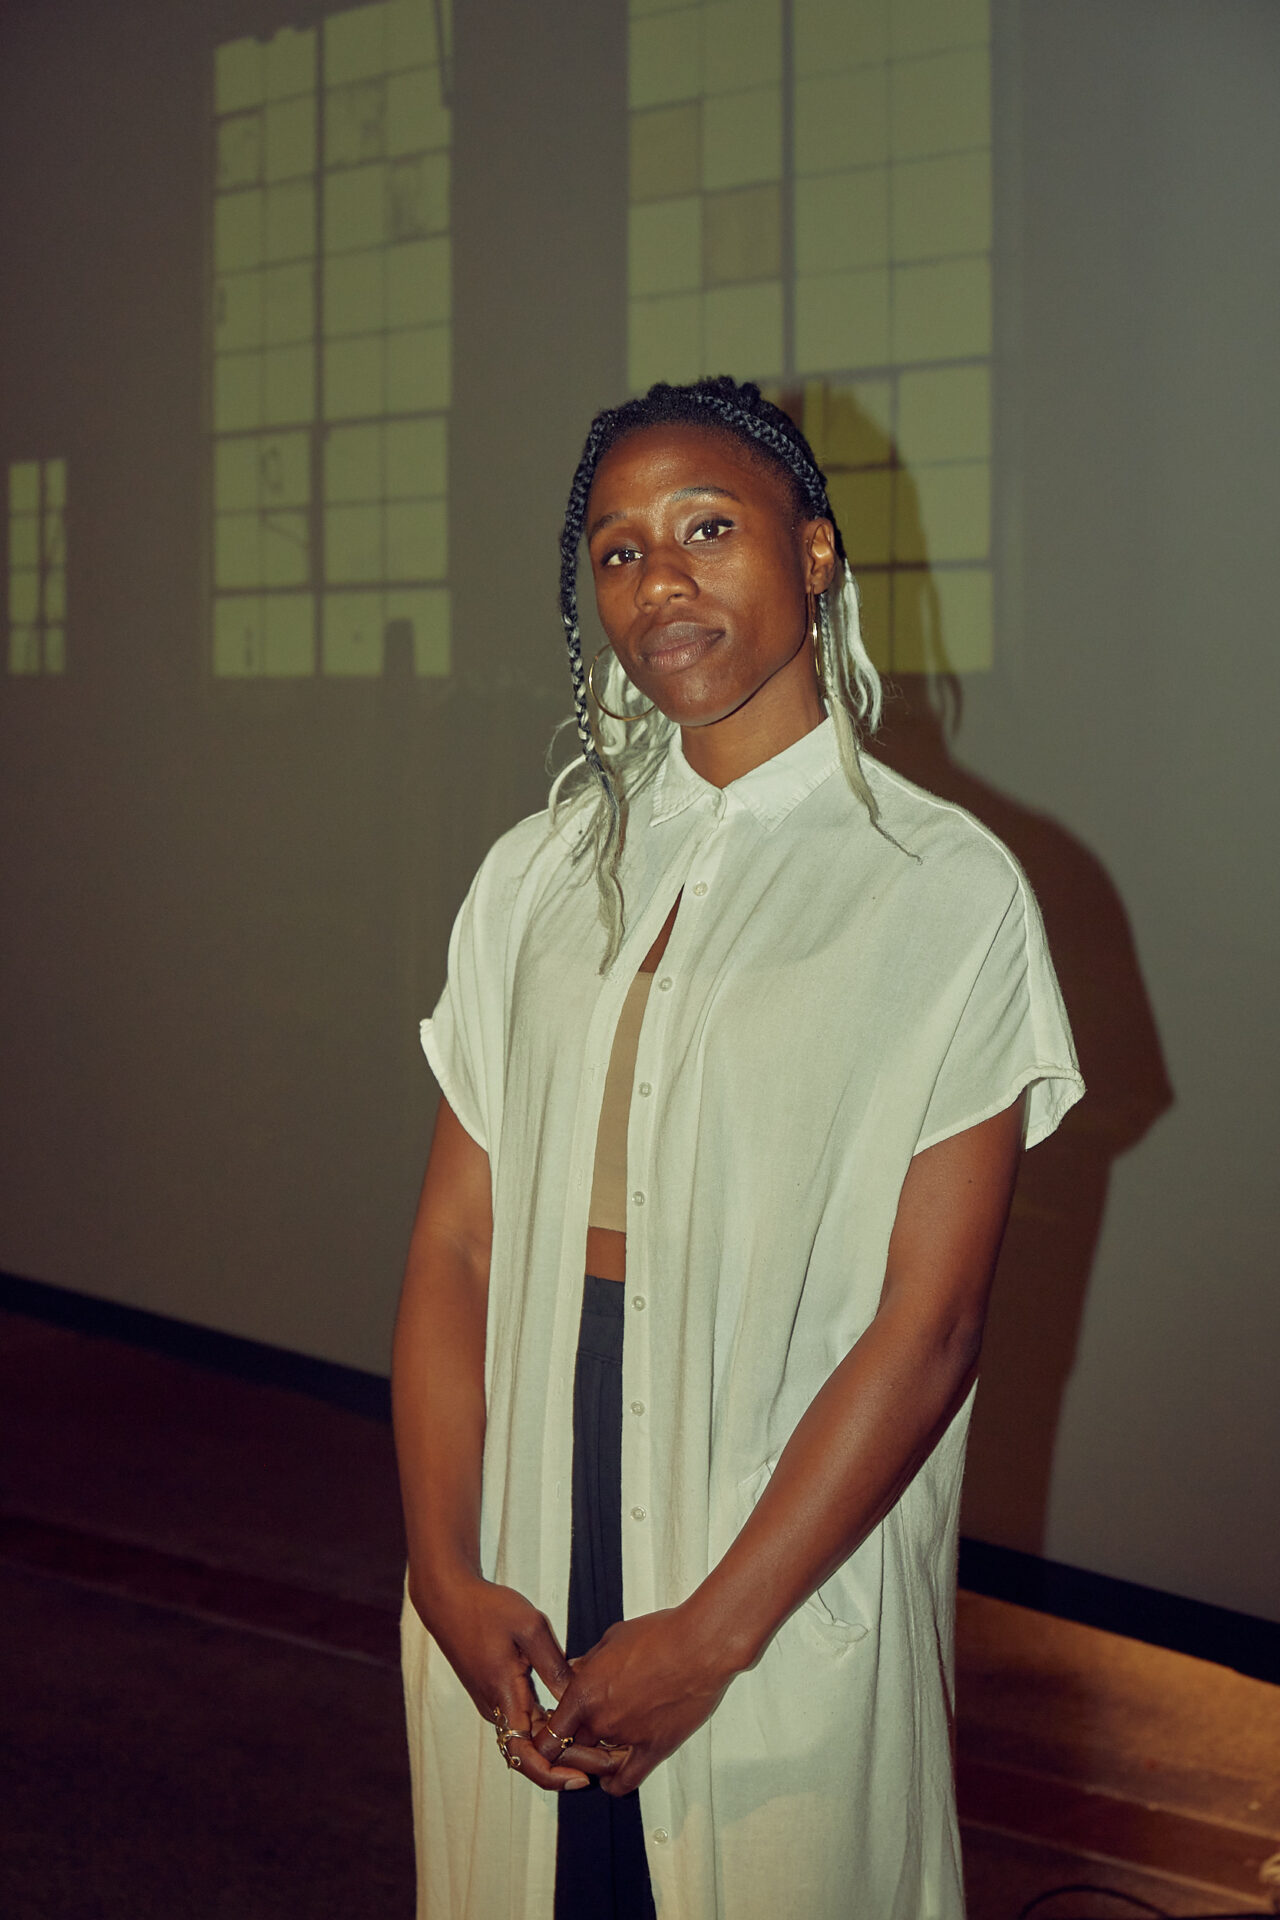 Artist Mimi Ọnụọha standing in front of her video installation These Networks In Our Skin. She is a dark-skin nigerian woman who wears a white sheer top and braids.